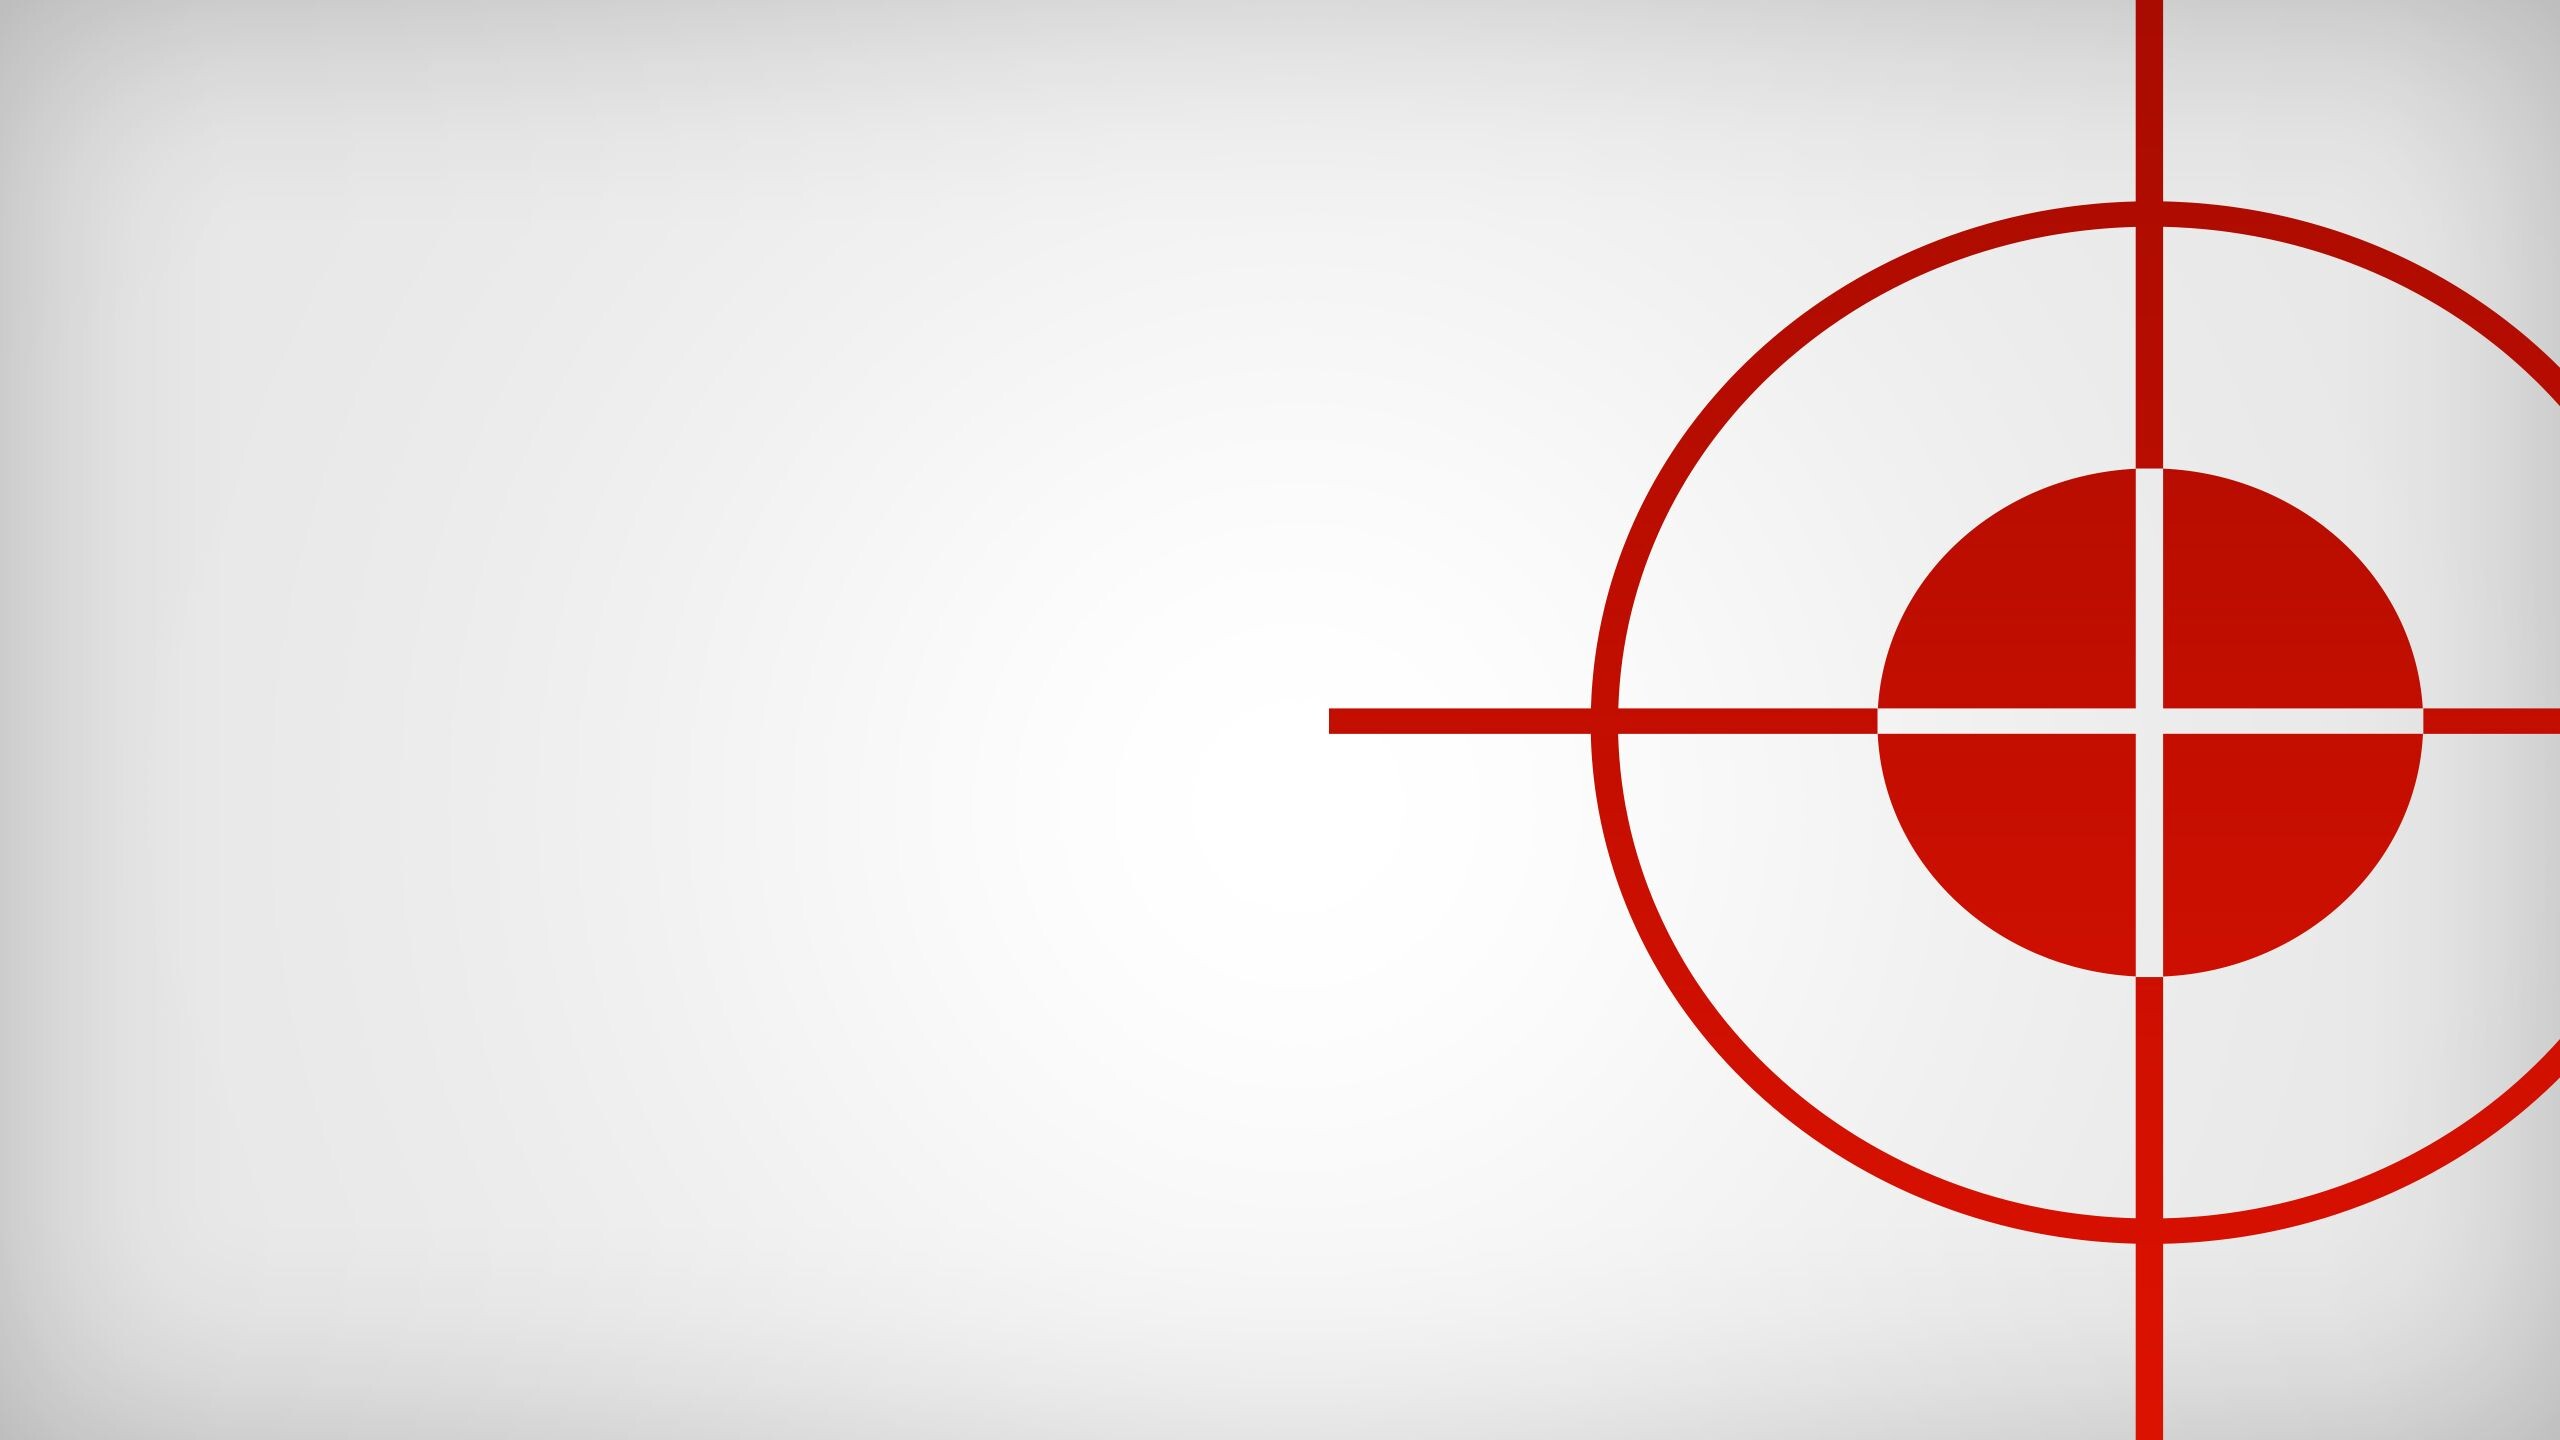 Goal (Aim): Red and white sniper target scope, Minimalistic, Sight cross hairs. 2560x1440 HD Wallpaper.